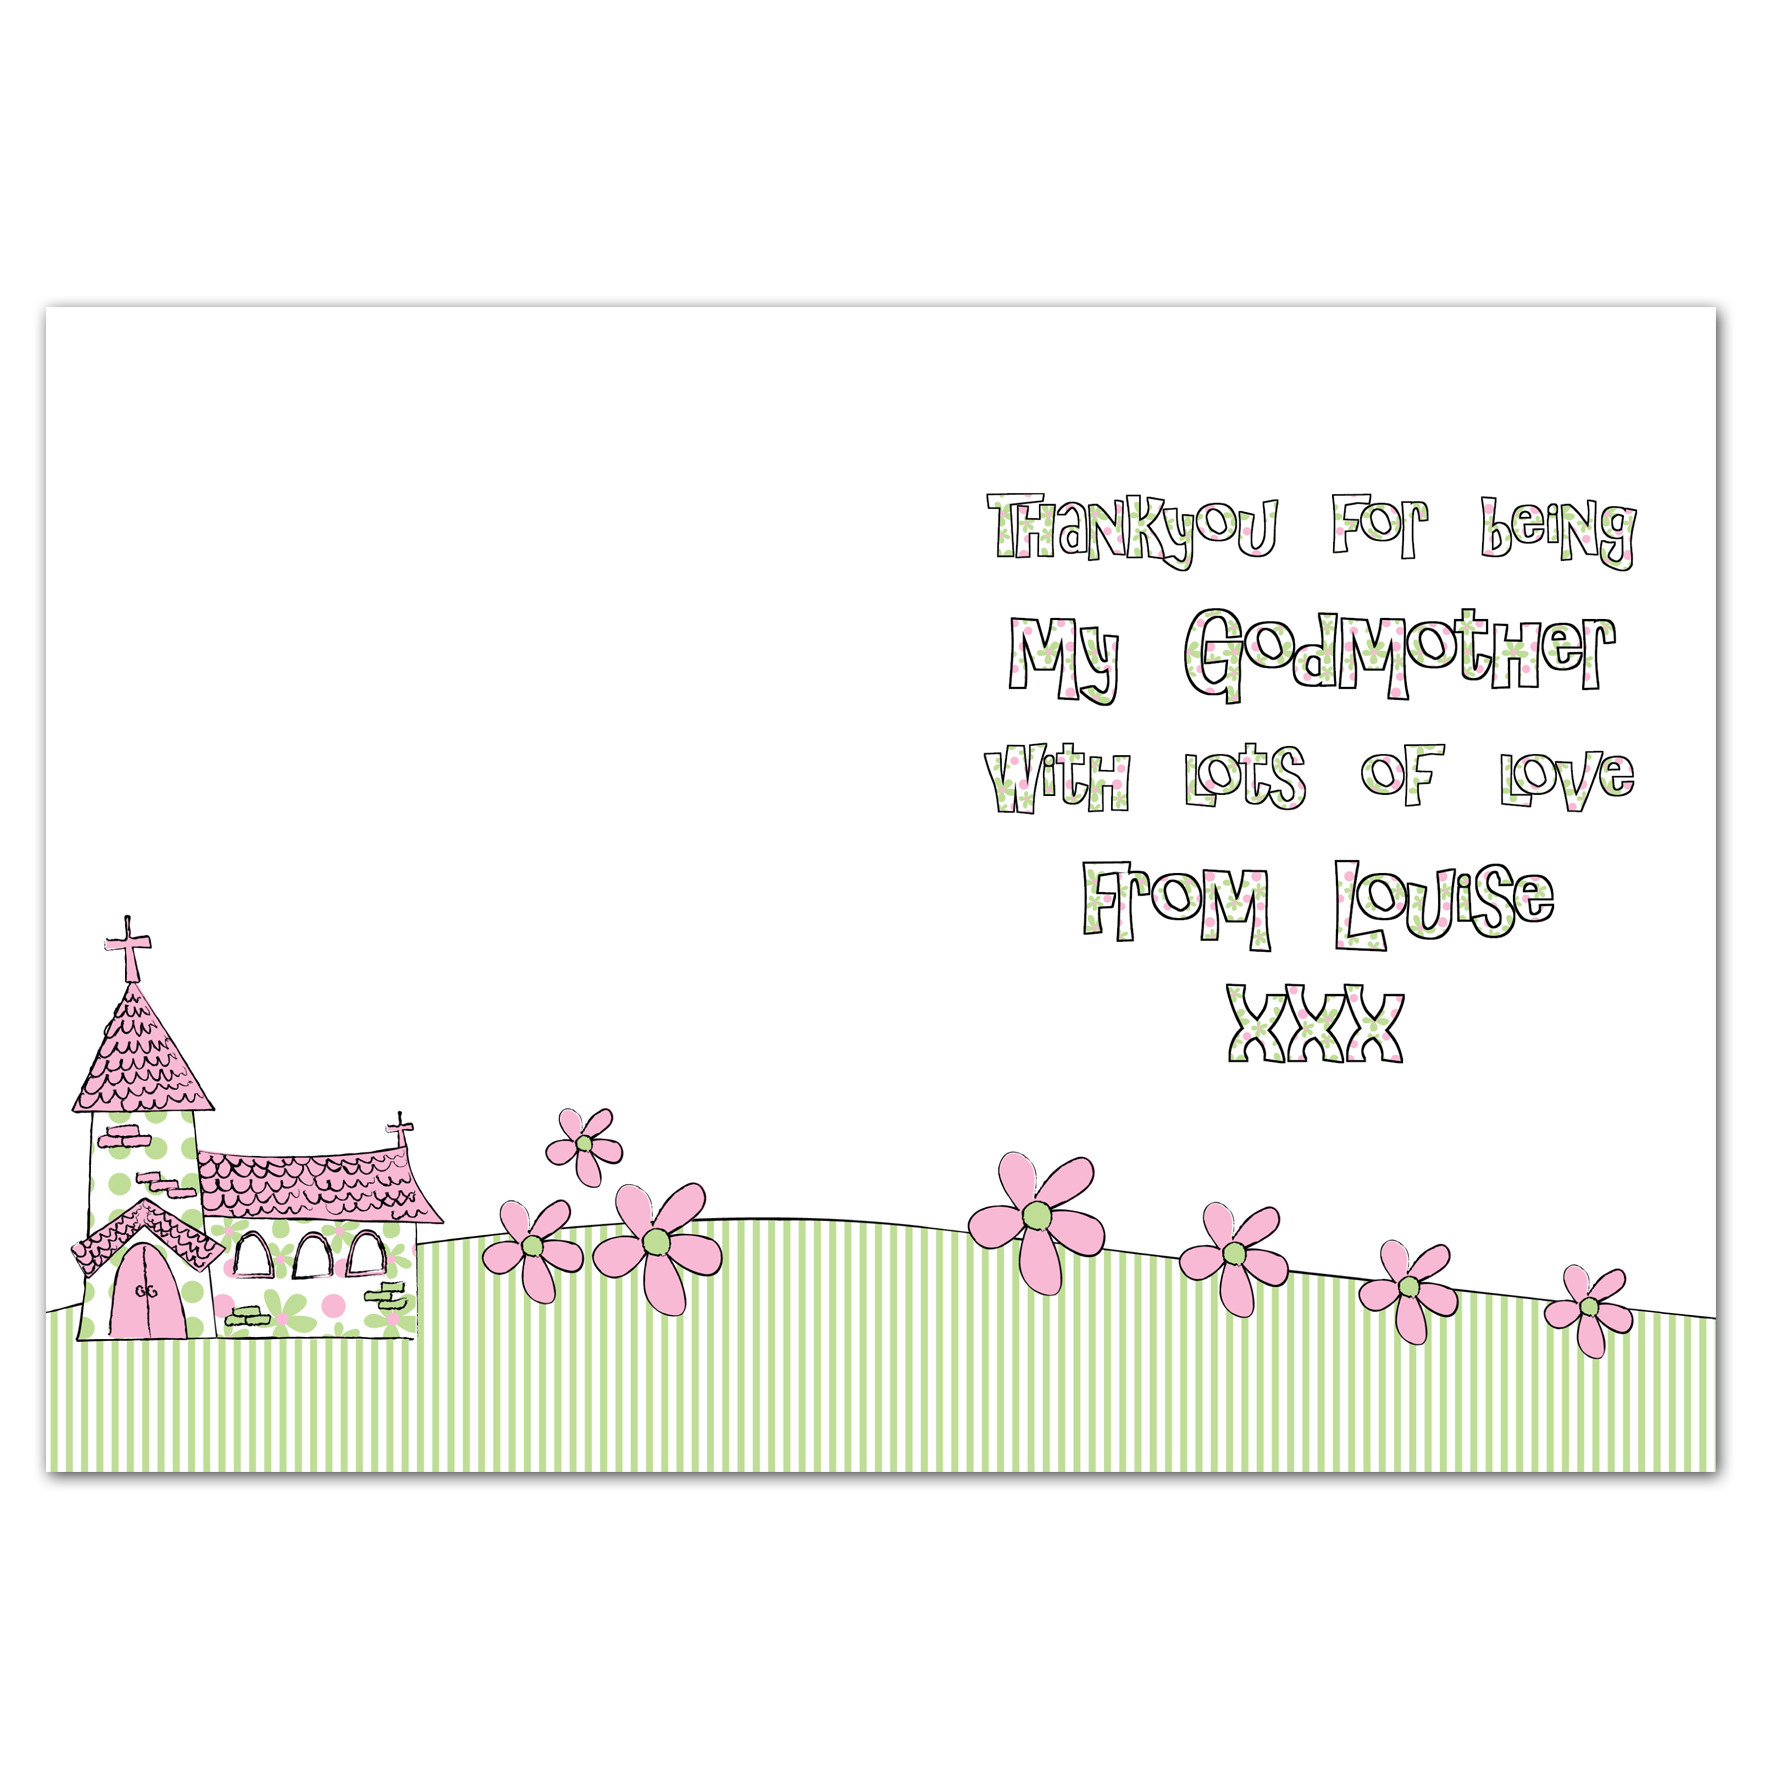 Best Godmother Quotes
 Religious Godmother Quotes QuotesGram